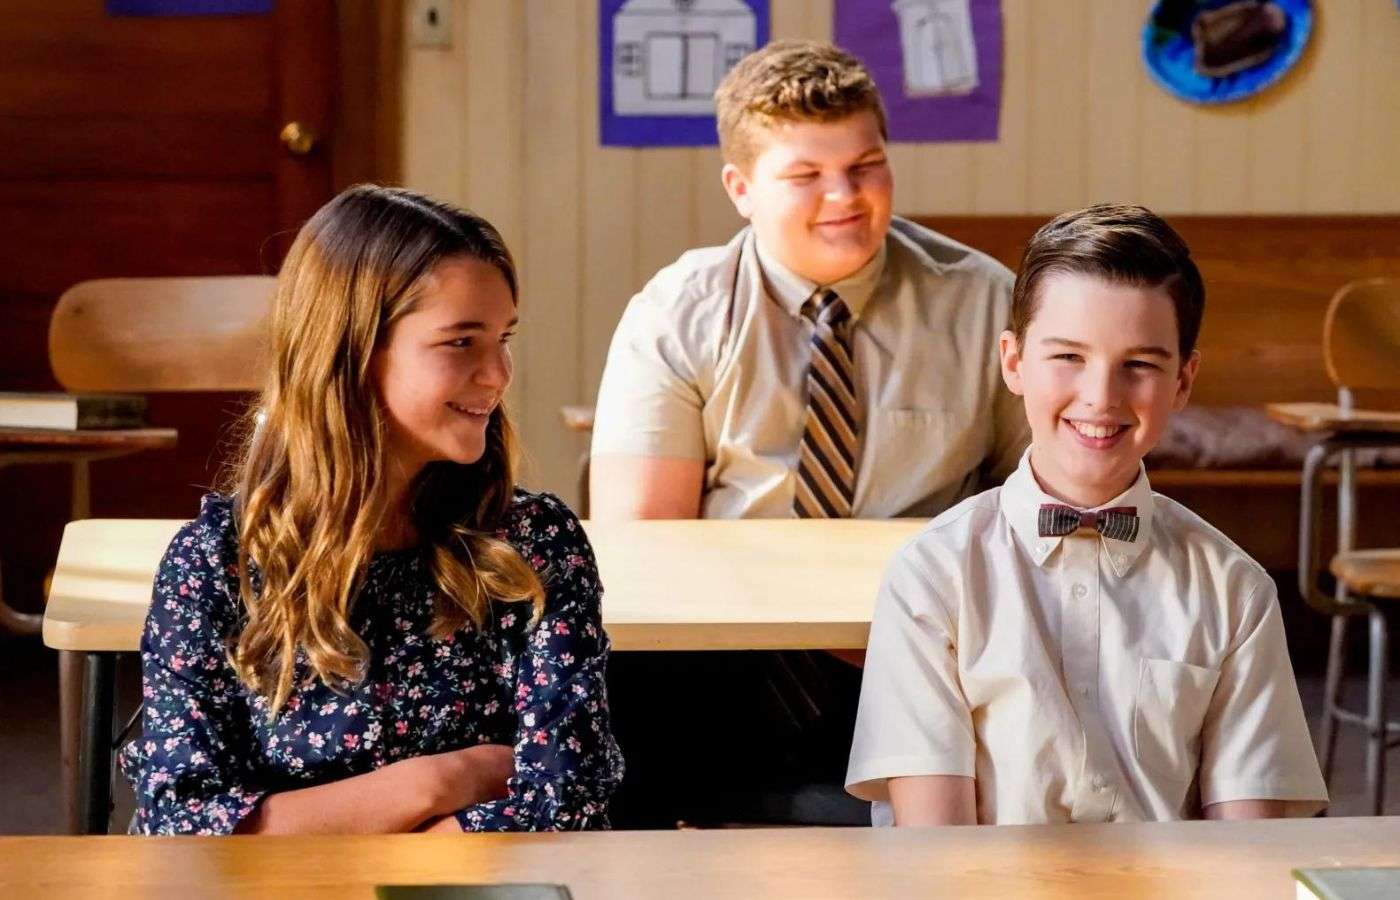 Billy Sparks, Missy, and Sheldon Cooper in Young Sheldon.